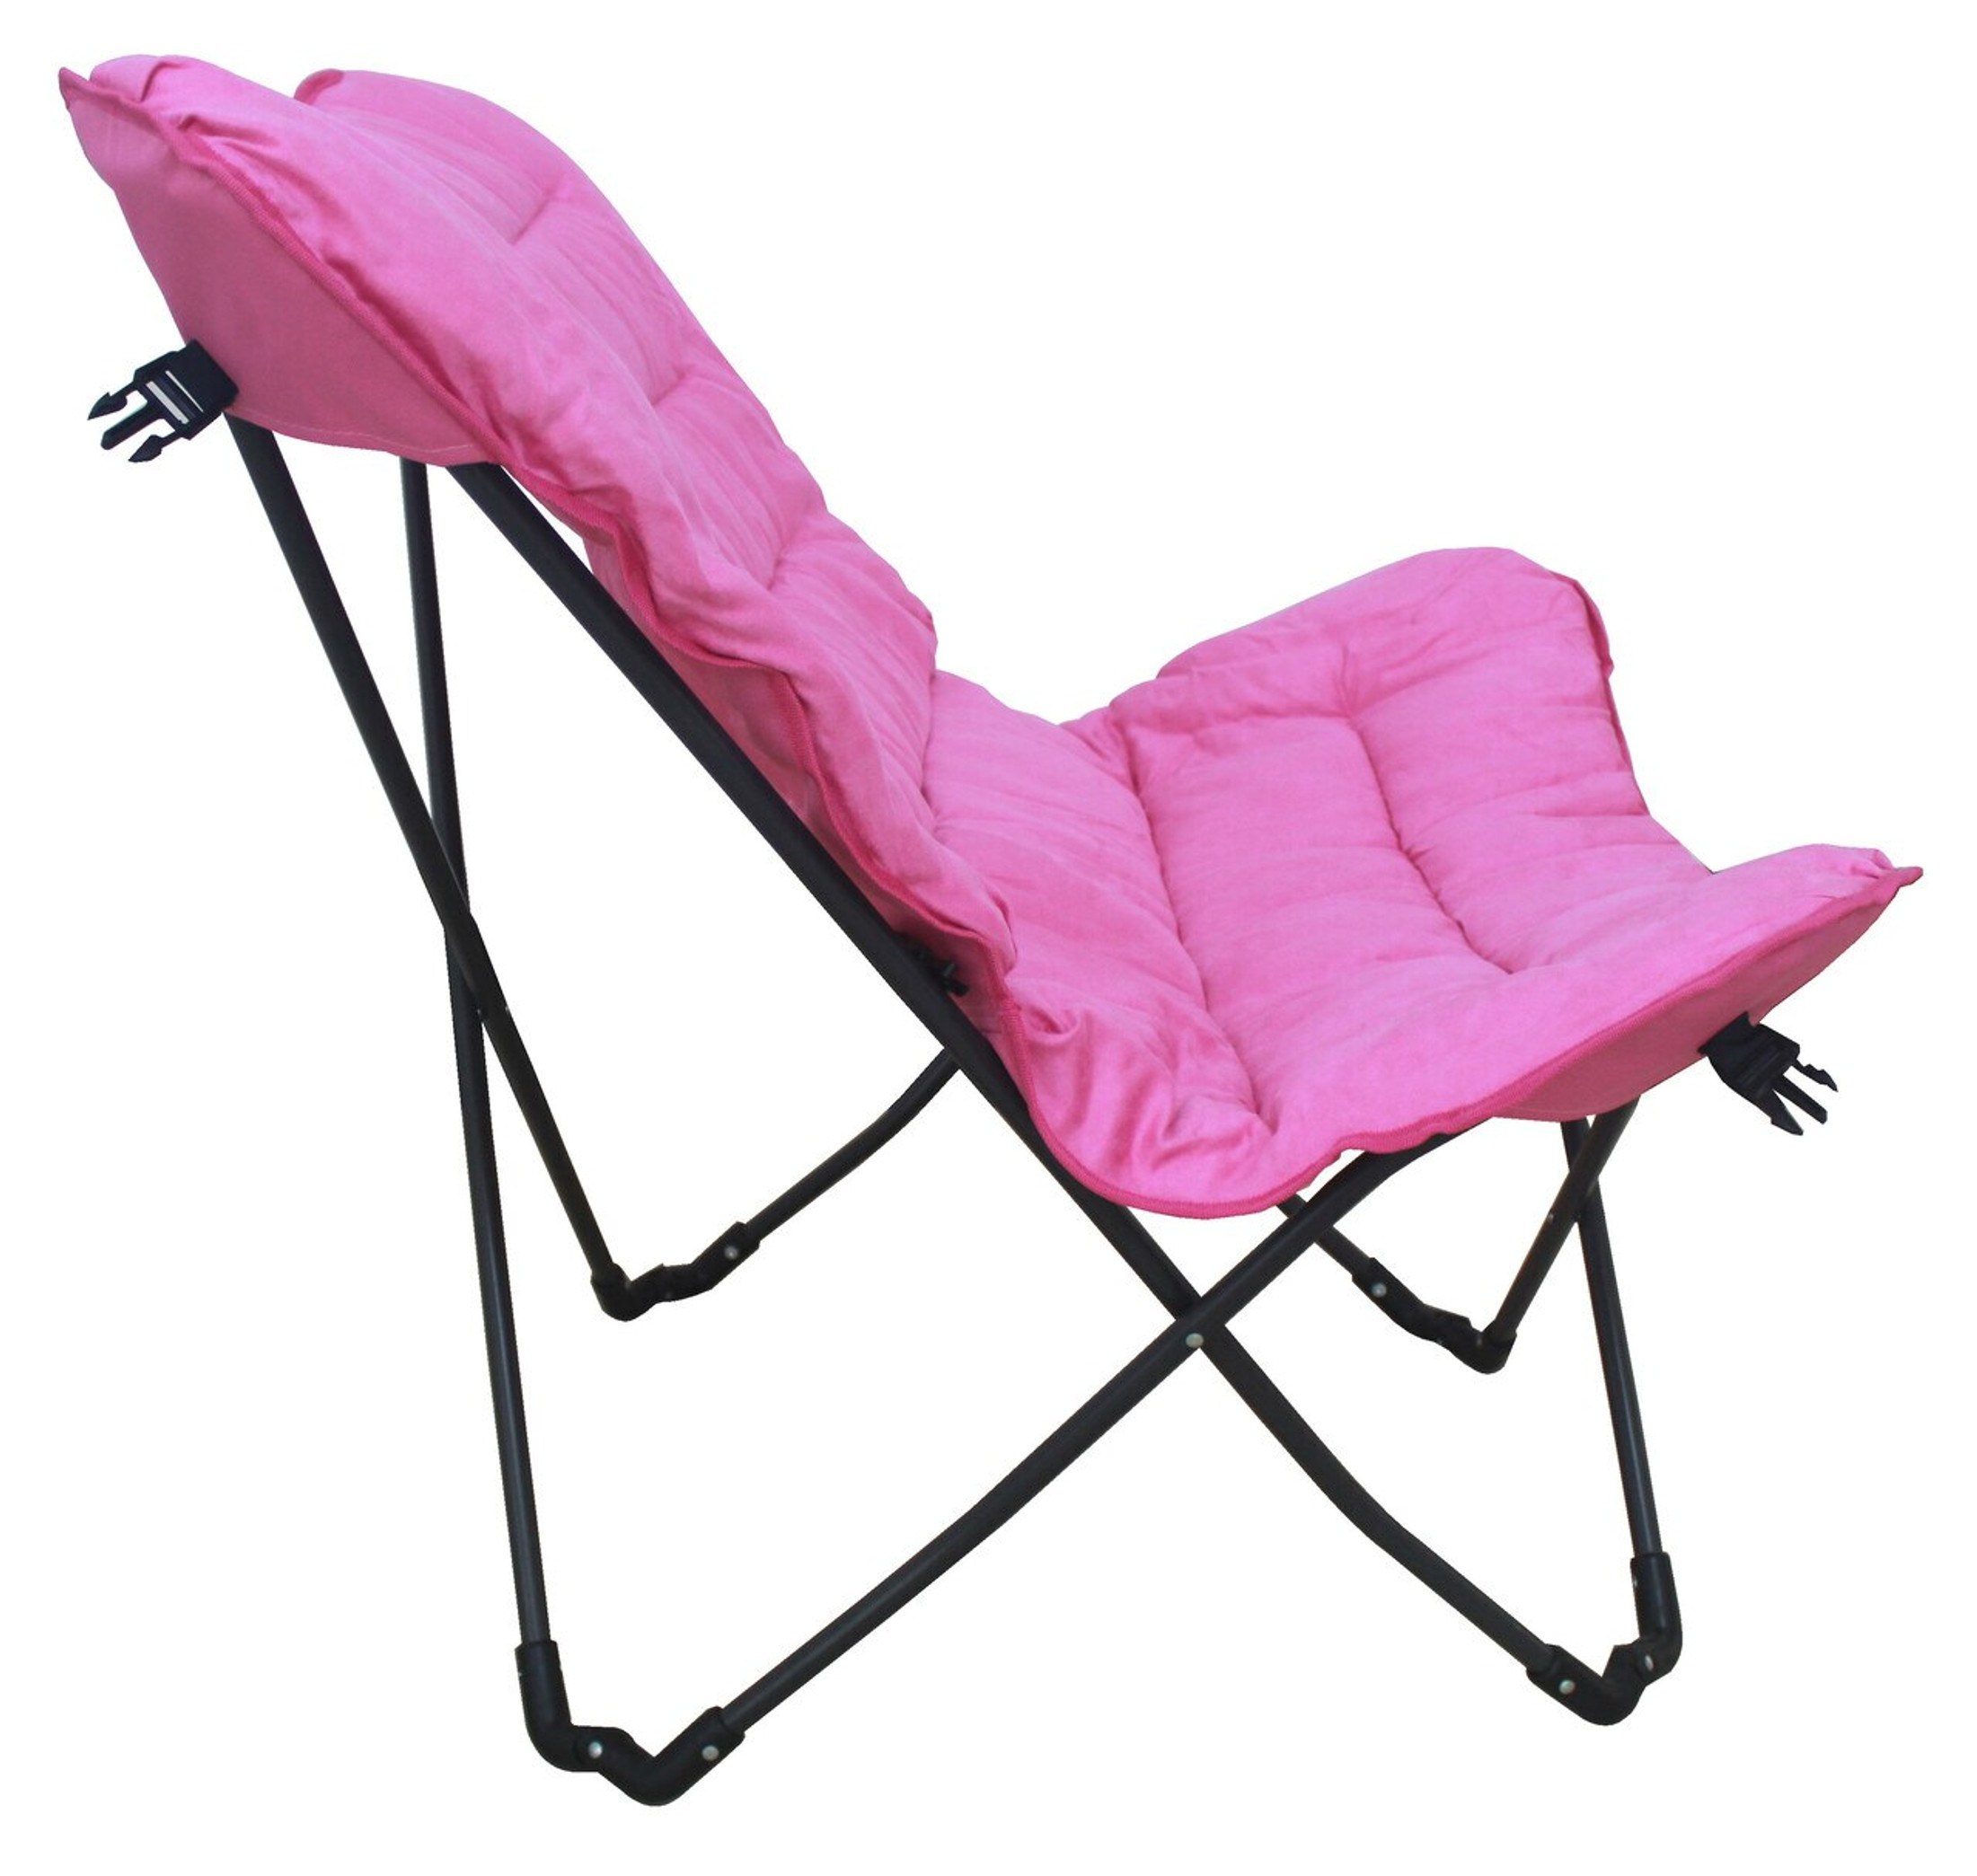 Zenithen Limited Pink Butterfly Folding Chair - Great Bedrooms, Rec-rooms, etc.